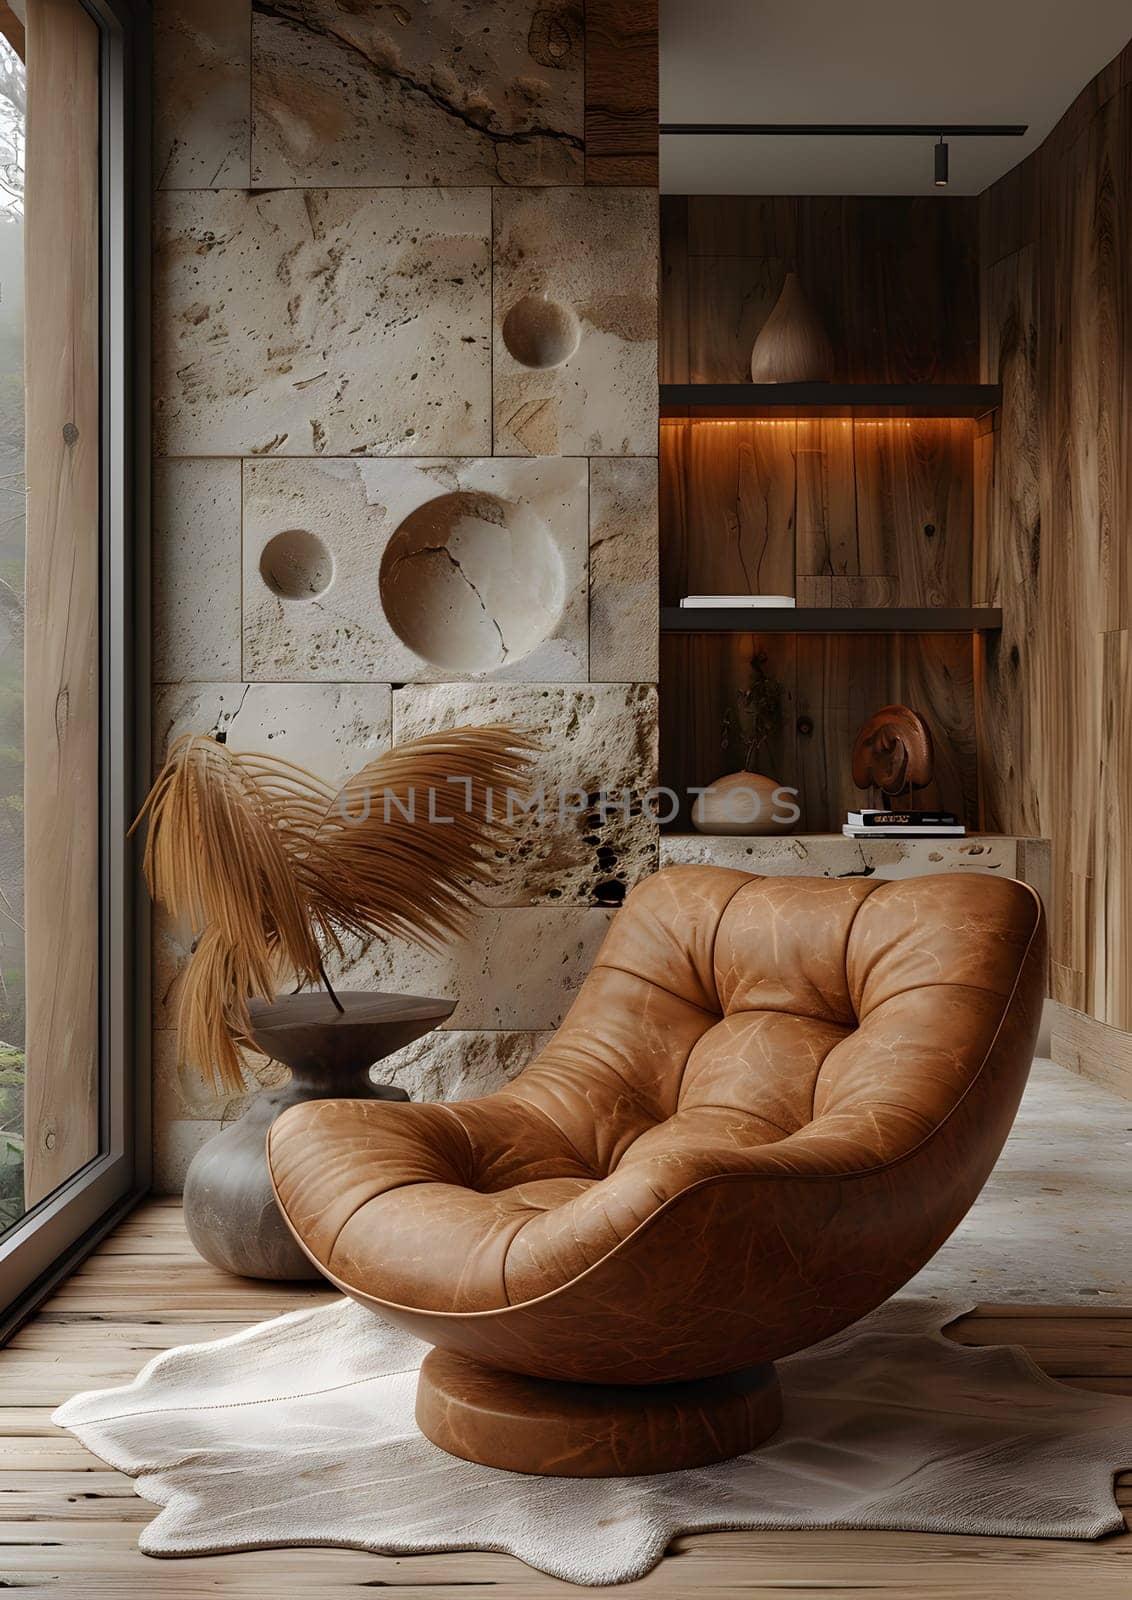 A wooden sculpture chair on a rug by a window in a hardwoodfloored living room by Nadtochiy